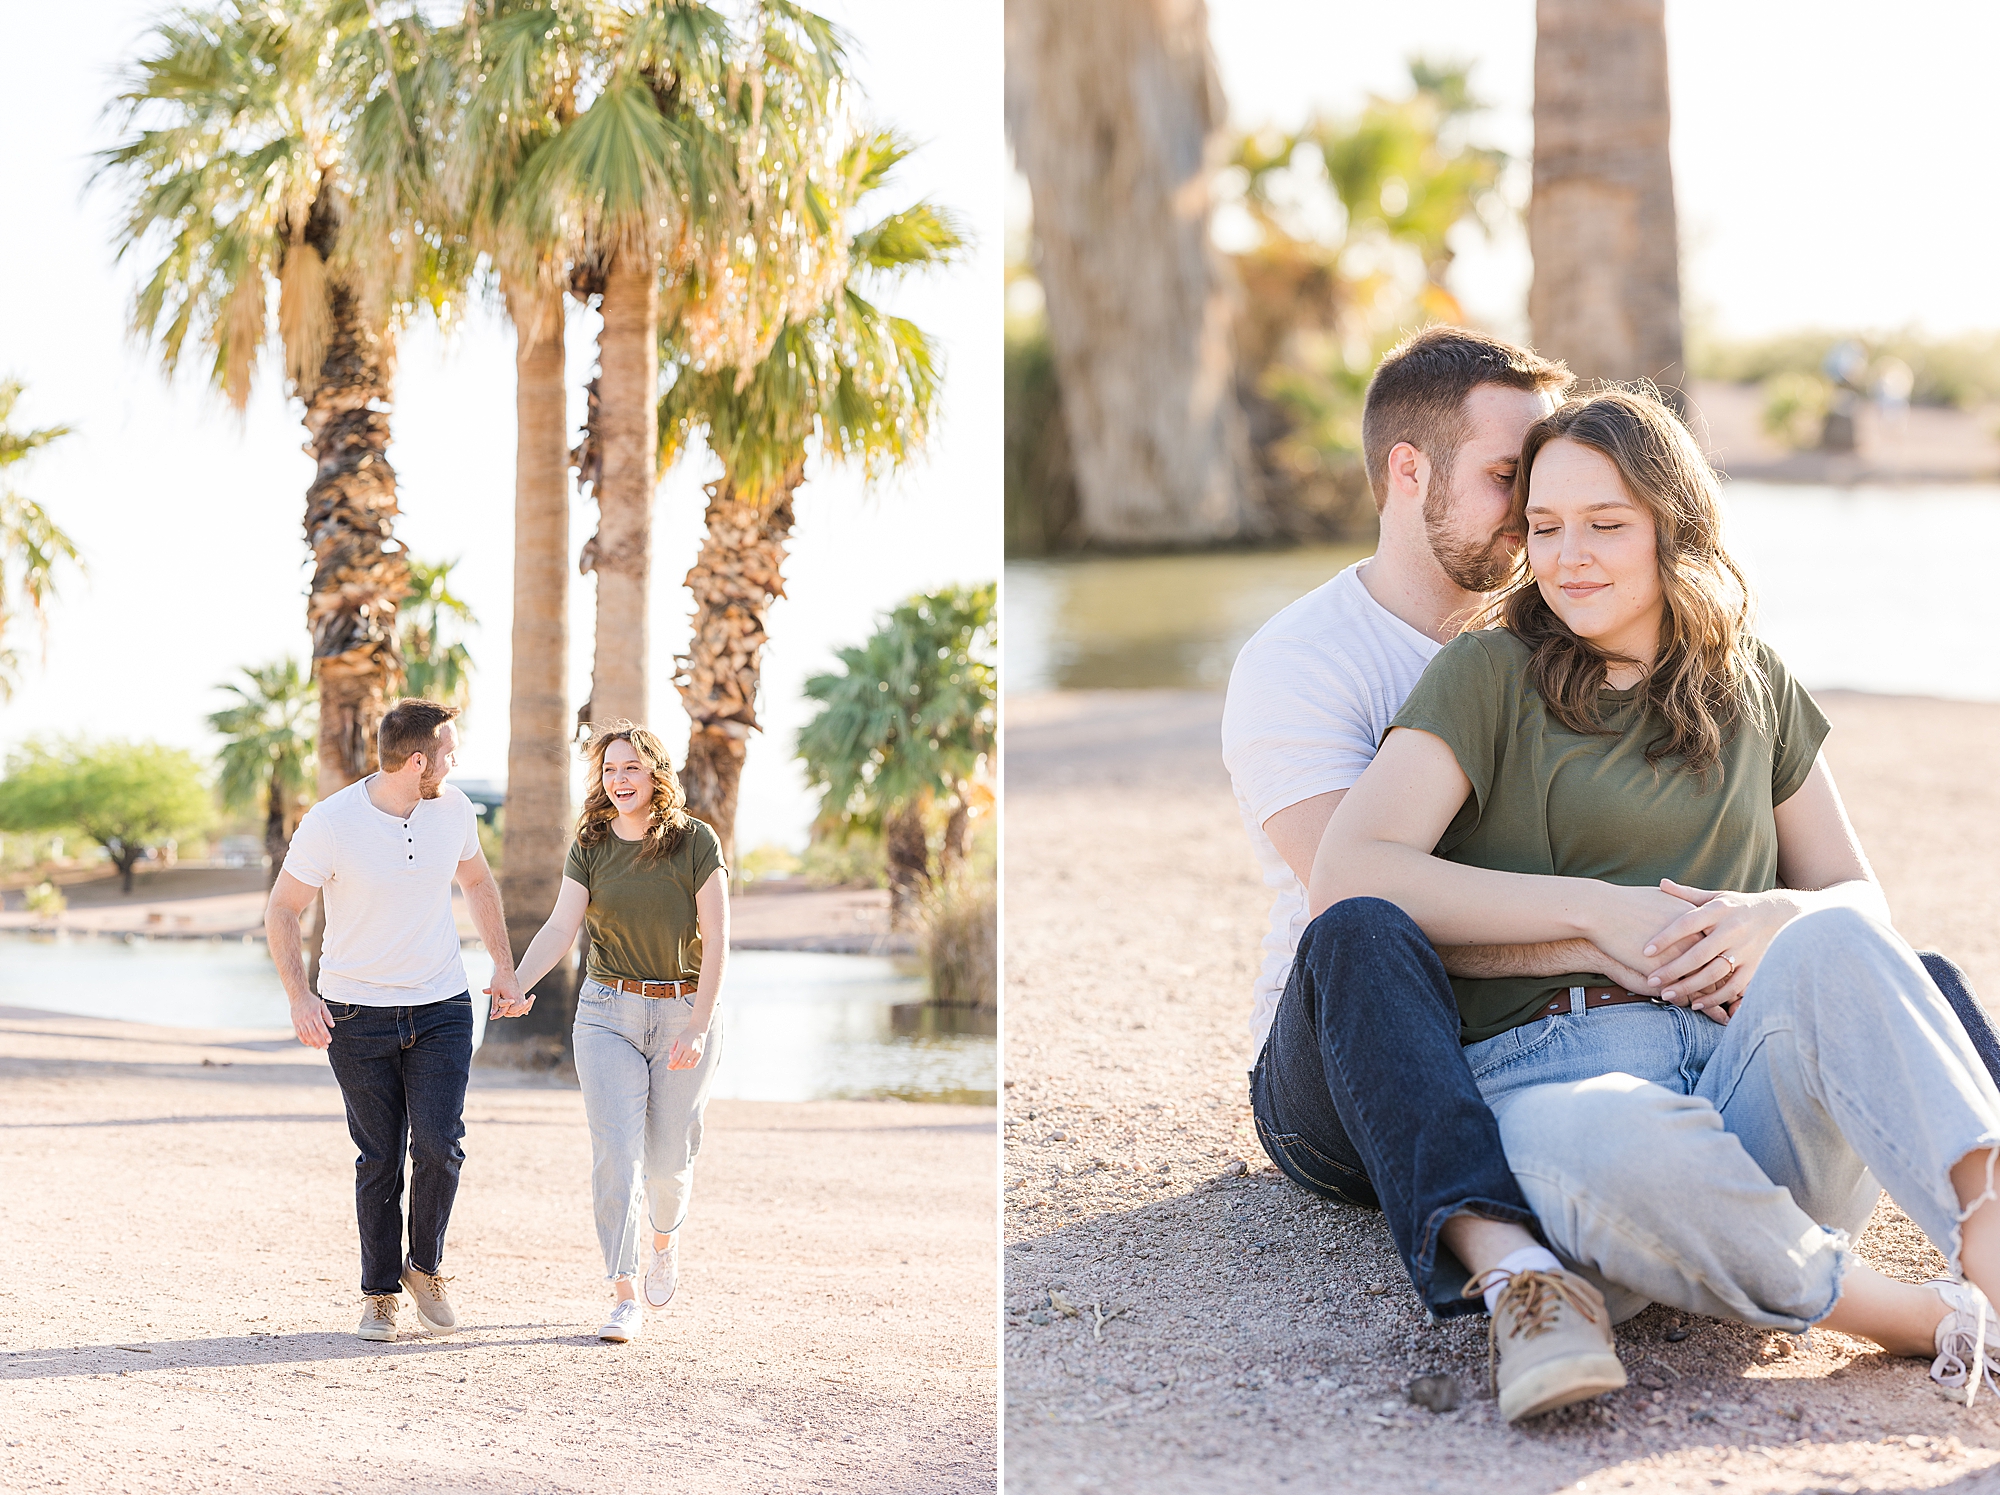 A scenic overlook of the beauty of Papago Park during their engagement session
